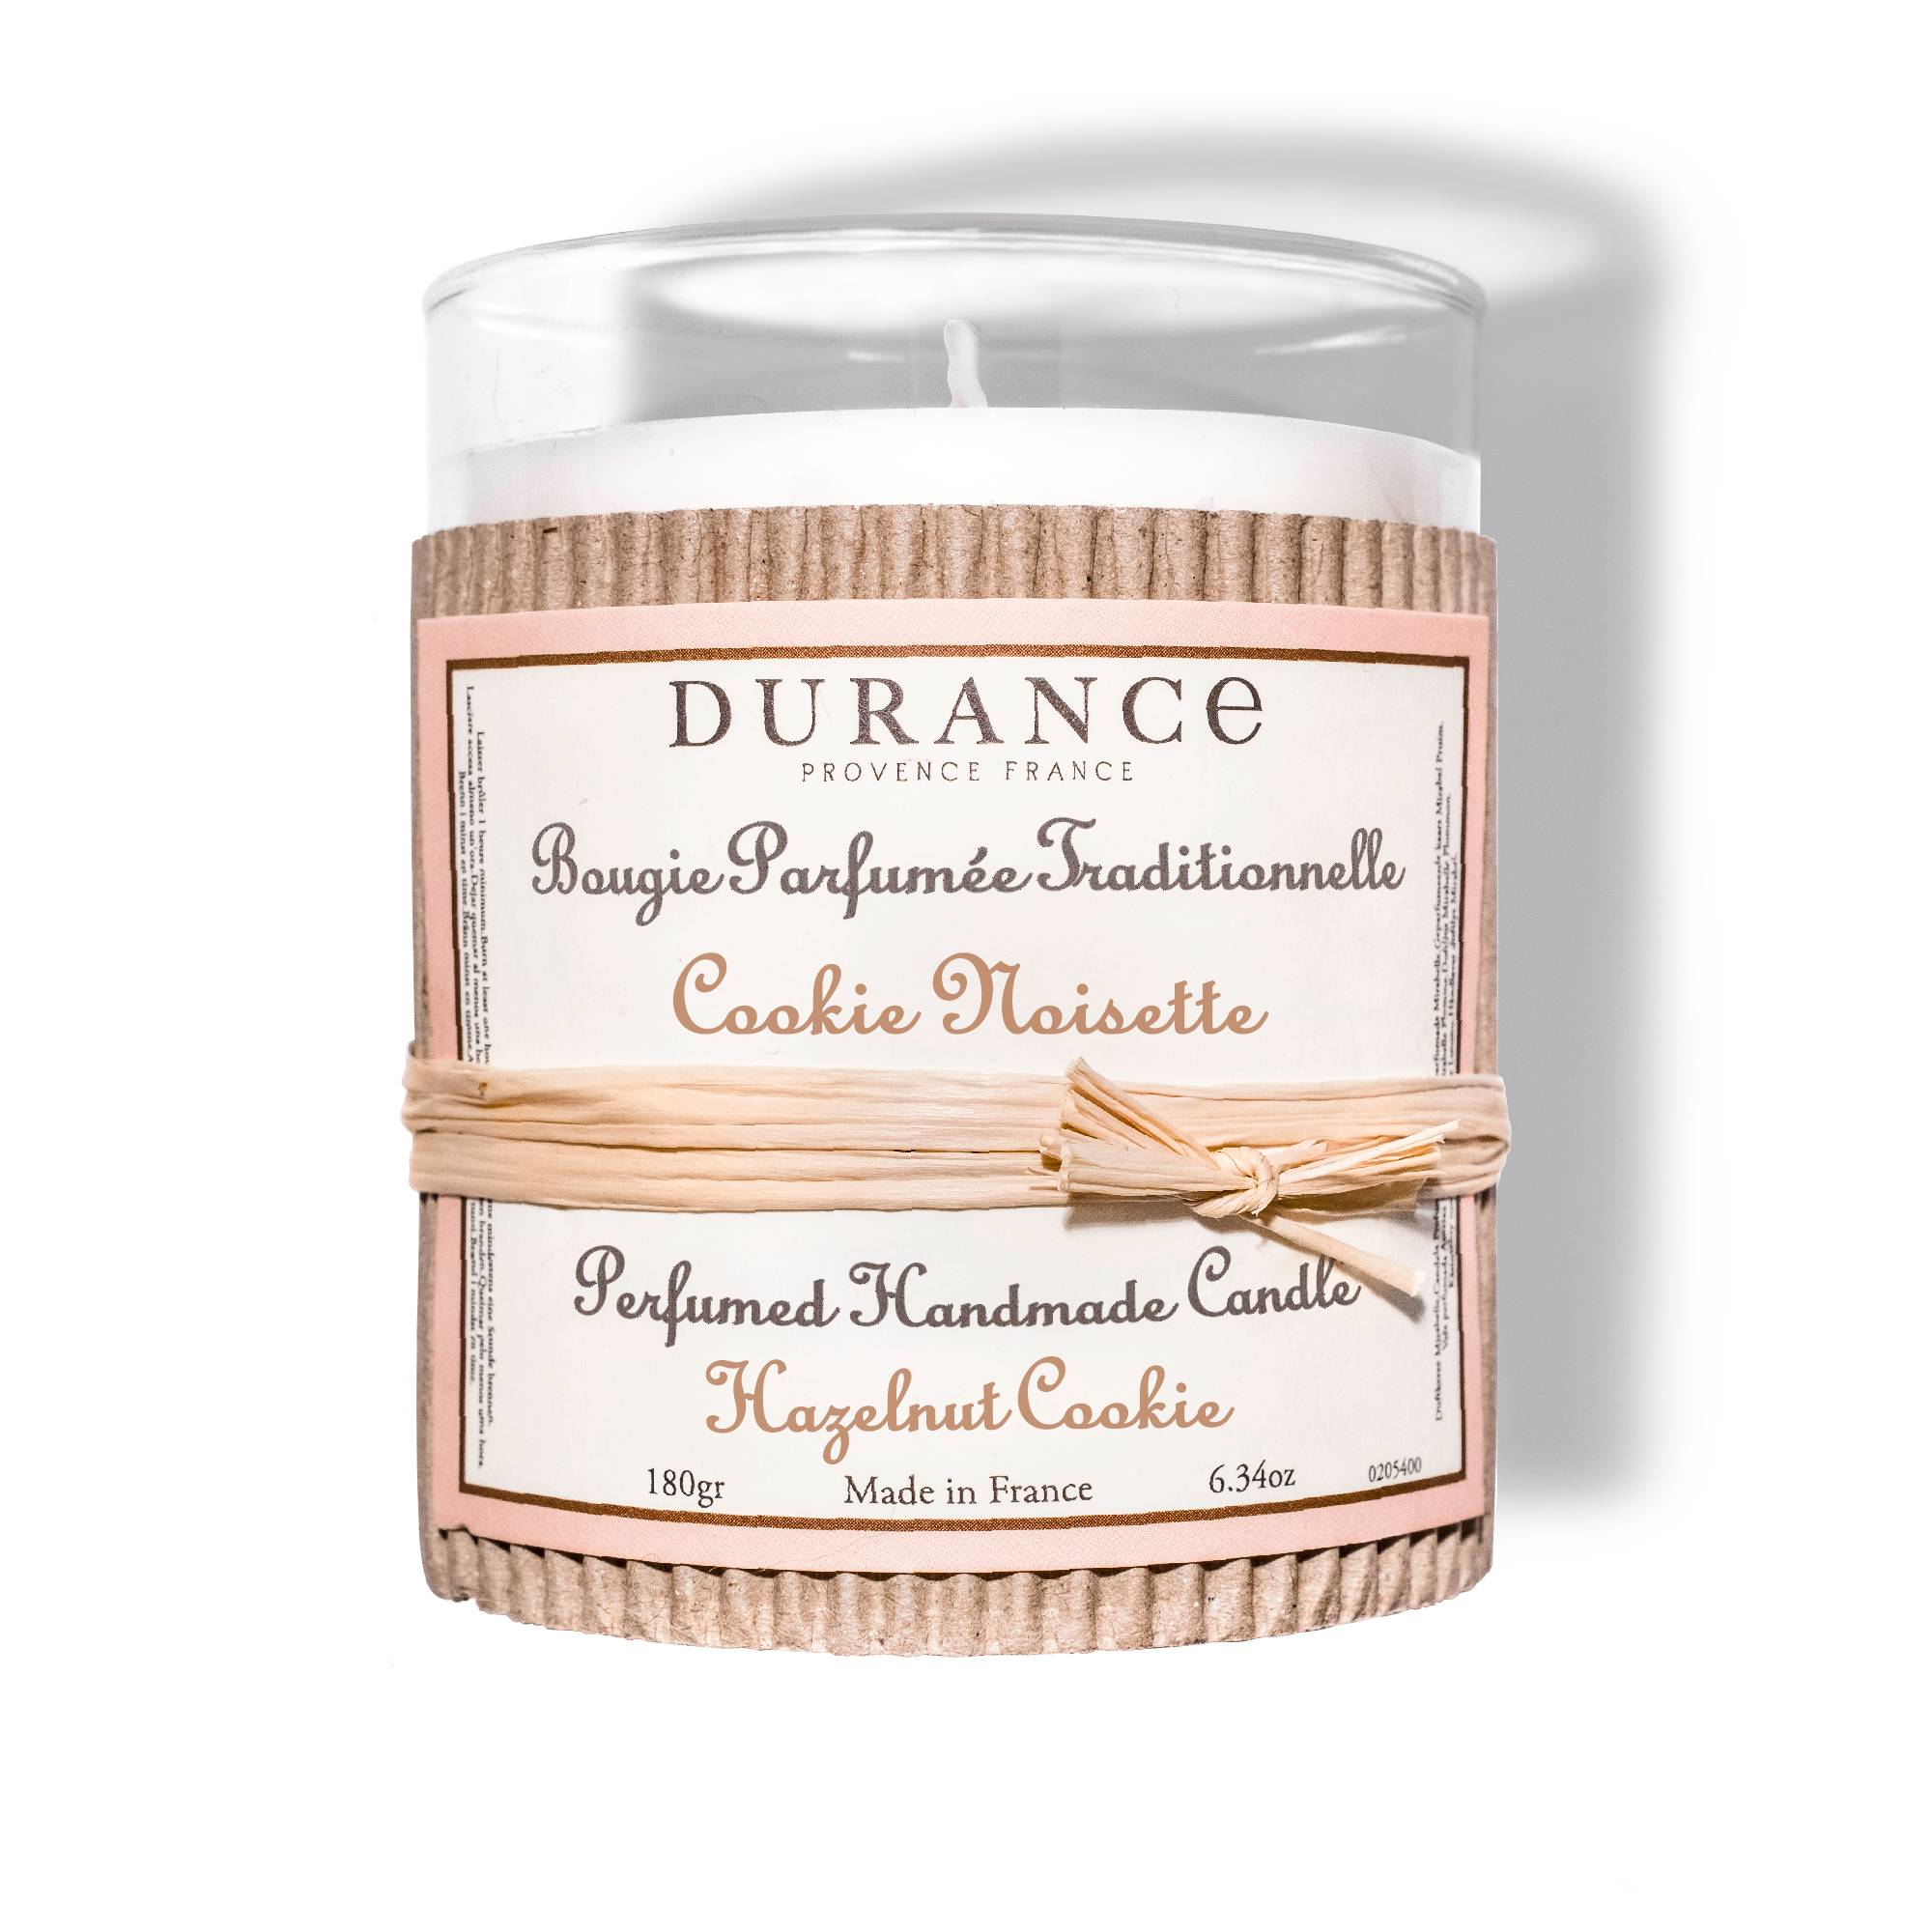 Bougie Traditionnelle Cookie Noisette 180g - Durance